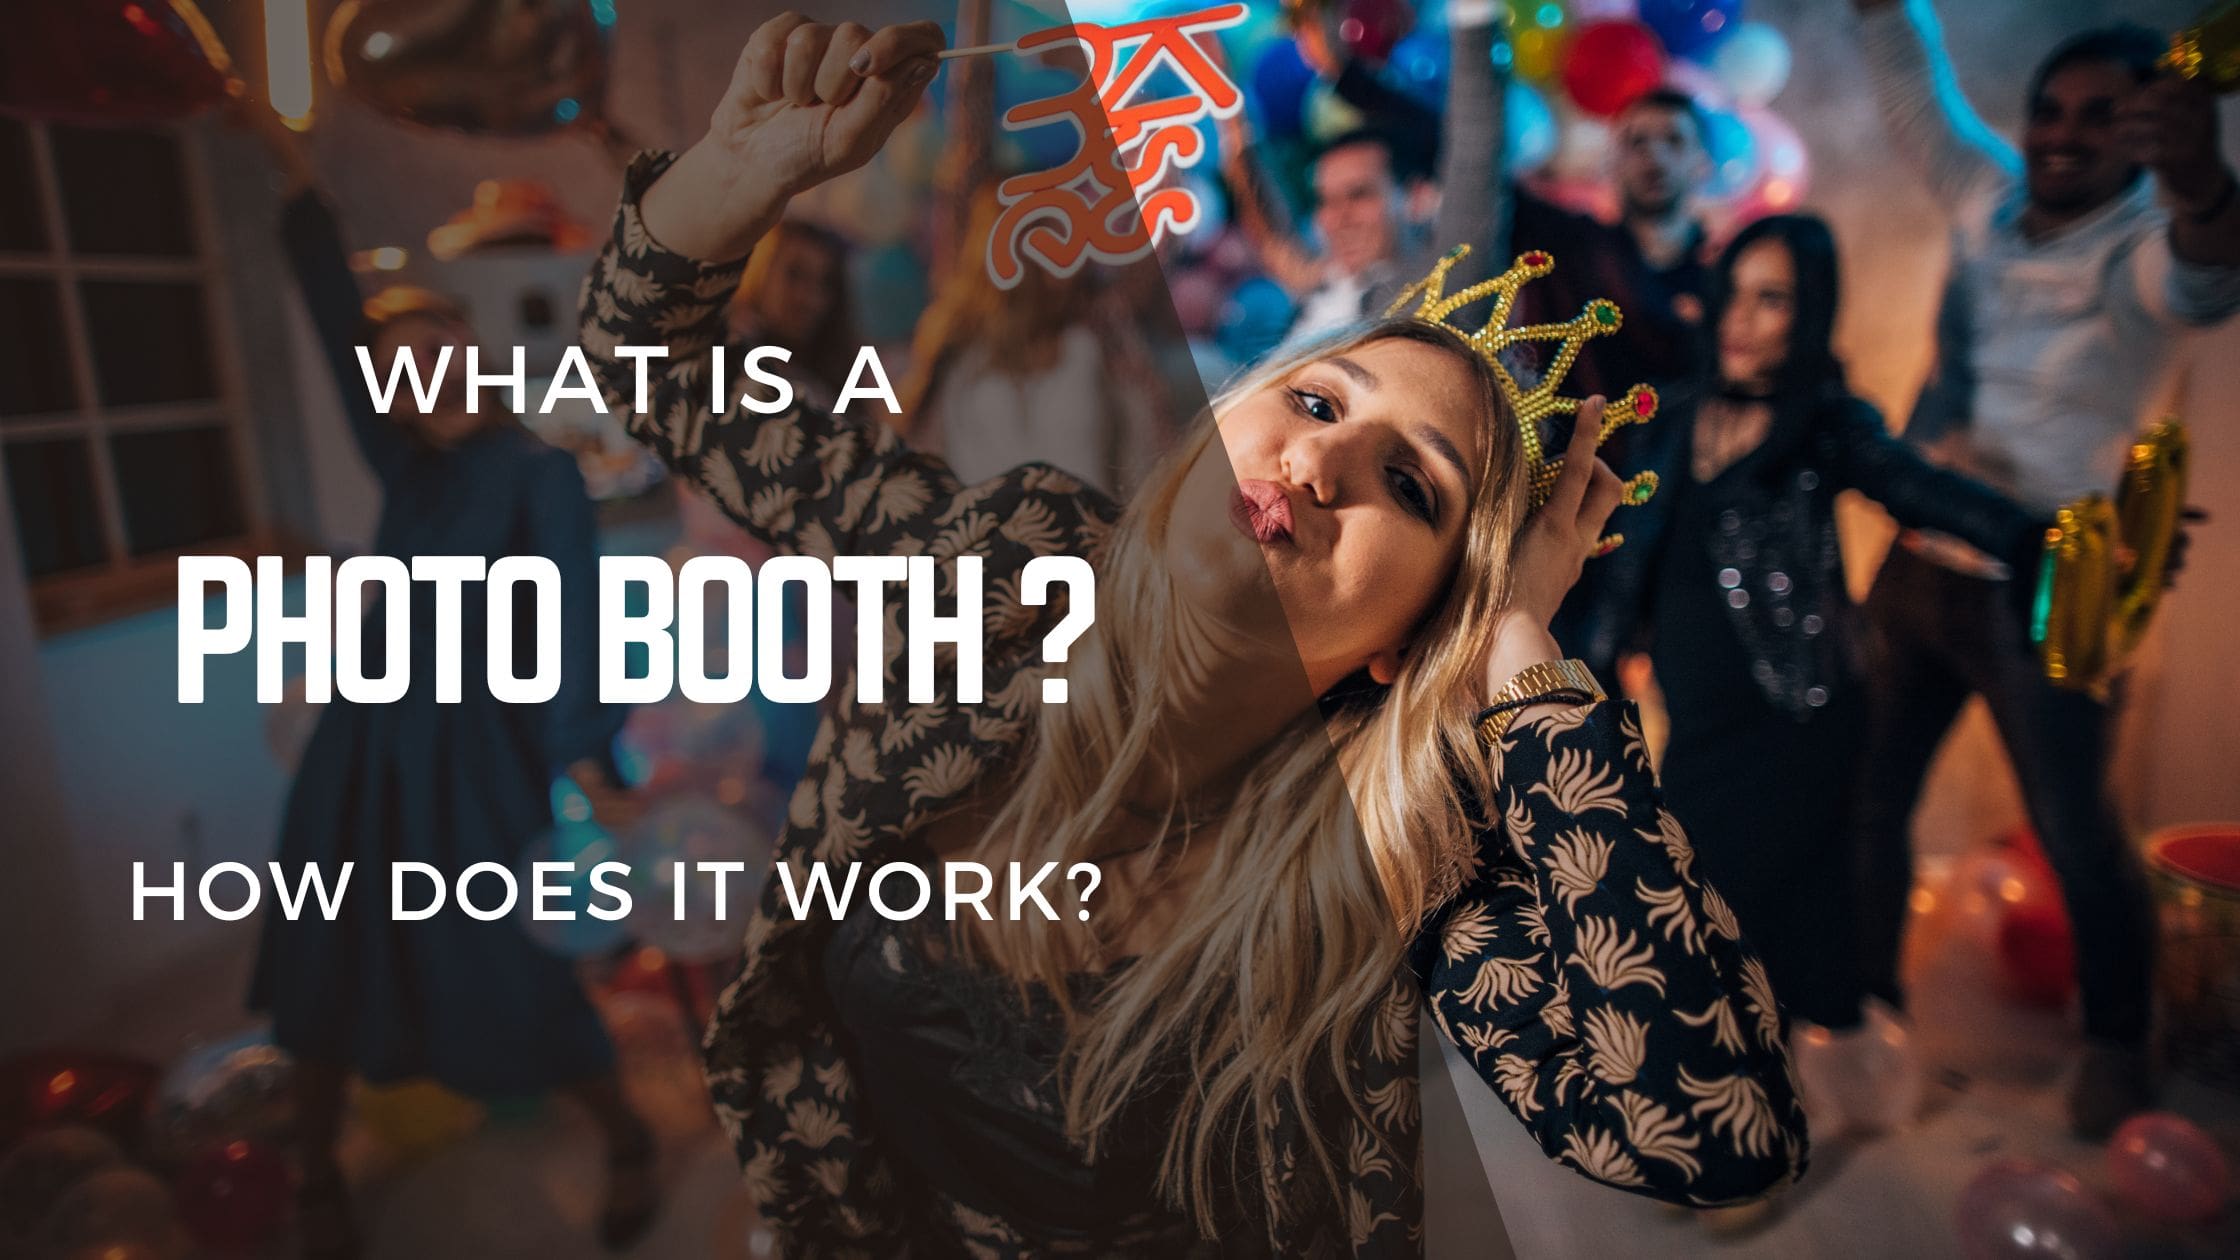 How does your photo booth work?